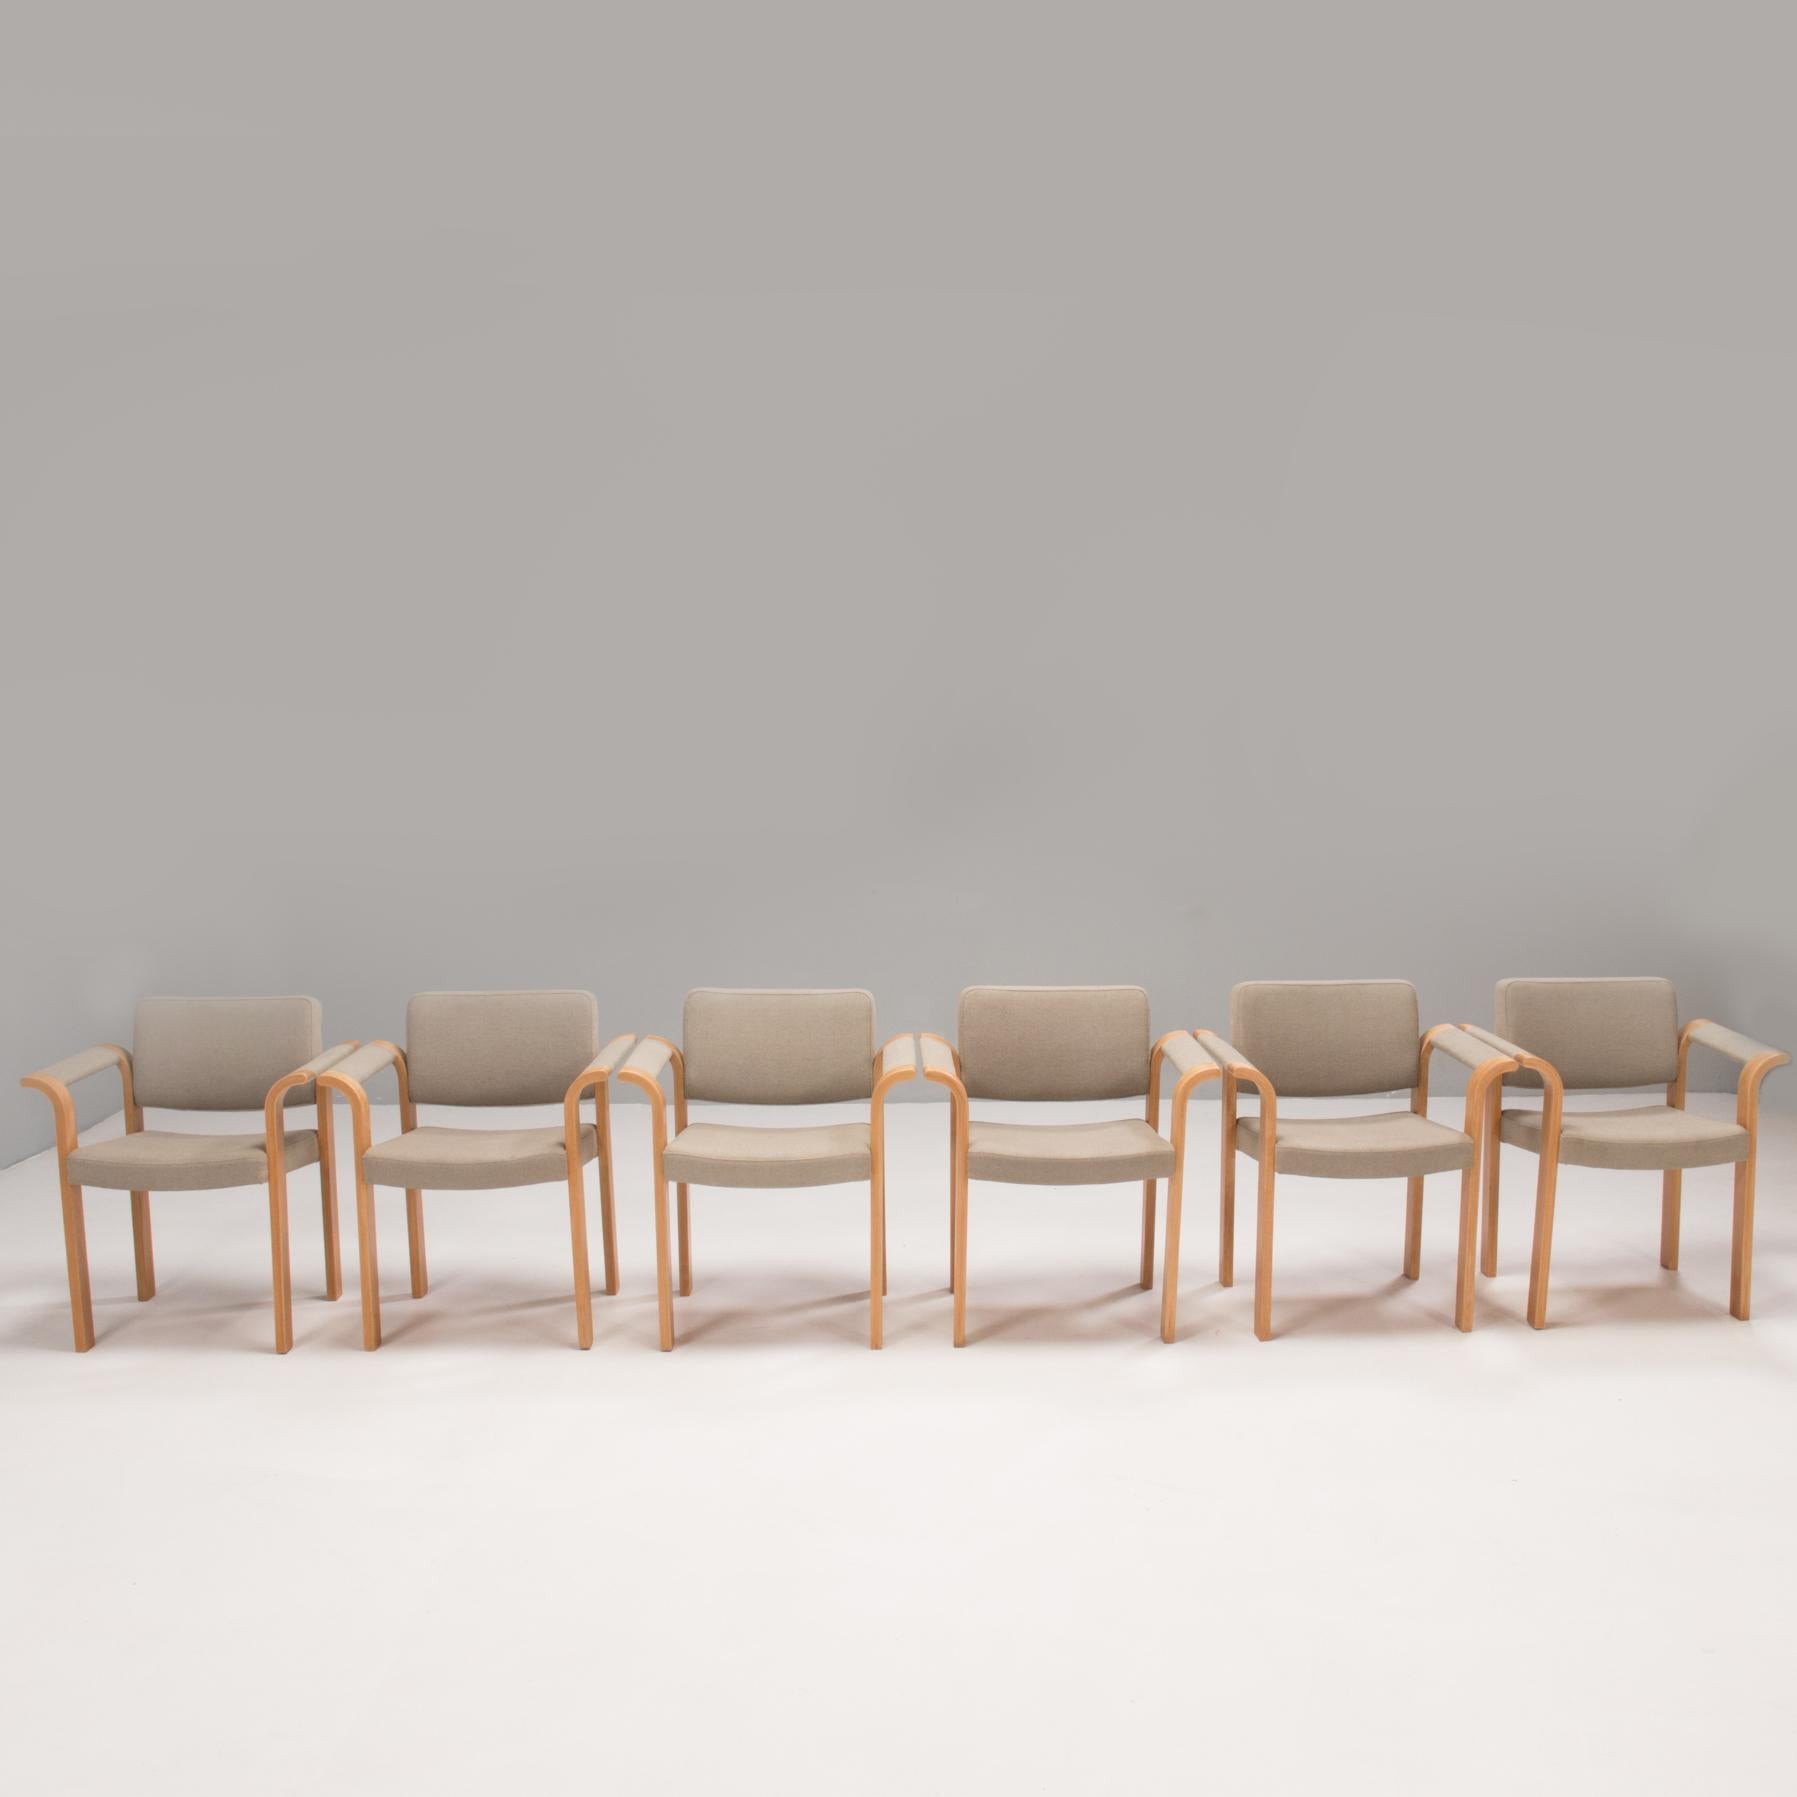 Designed by Rud Thygesen & Johnny Sørensen and manufactured by Magnus Olesen, these chairs are a fantastic example of 1970s Danish design.

With laminated wooden frames, the chairs have a linear silhouette, contrasted by the curved